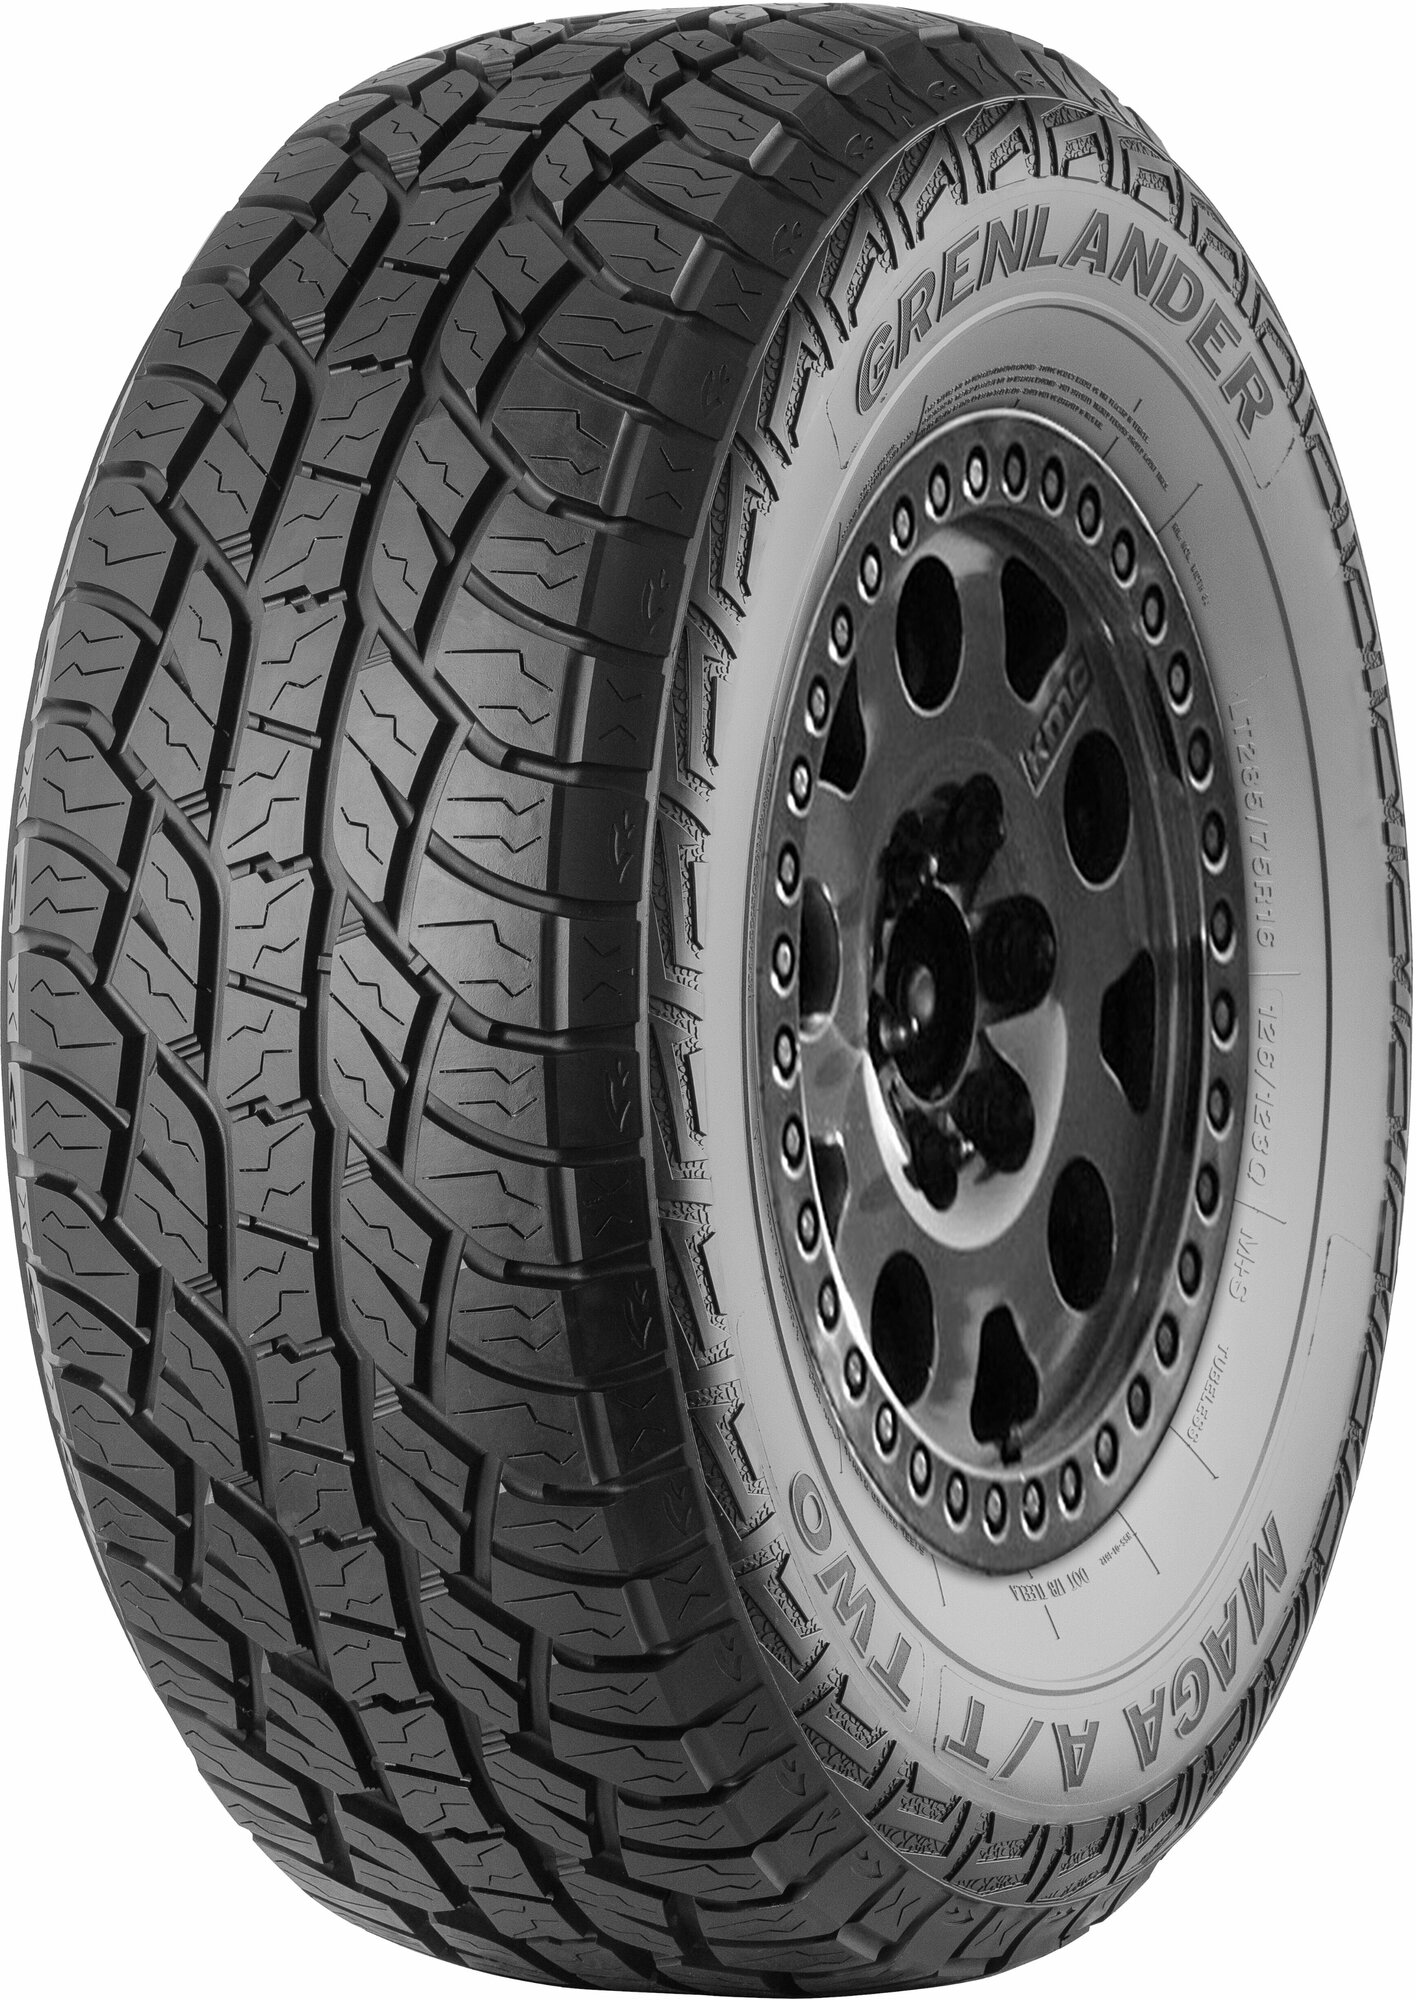 LT235/75R15 Grenlander Maga A/T Two 104/101S